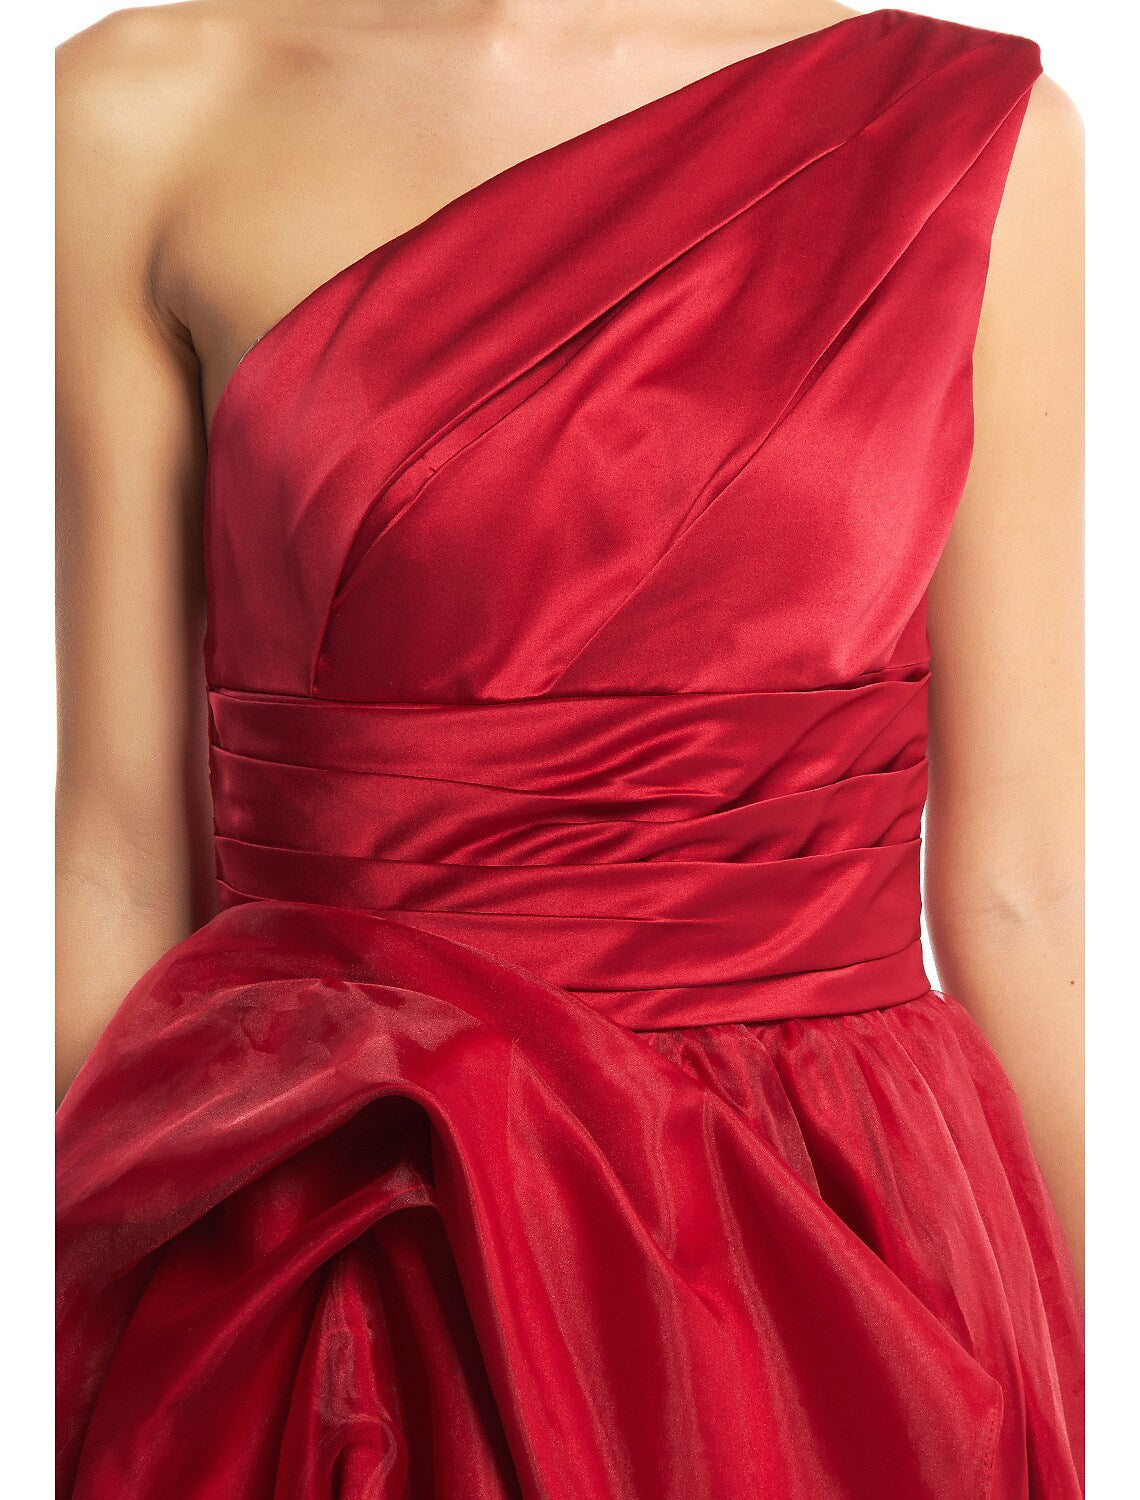 Elegant Prom Formal Evening Dress One Shoulder Sleeveless Floor Length Organza with Side Draping